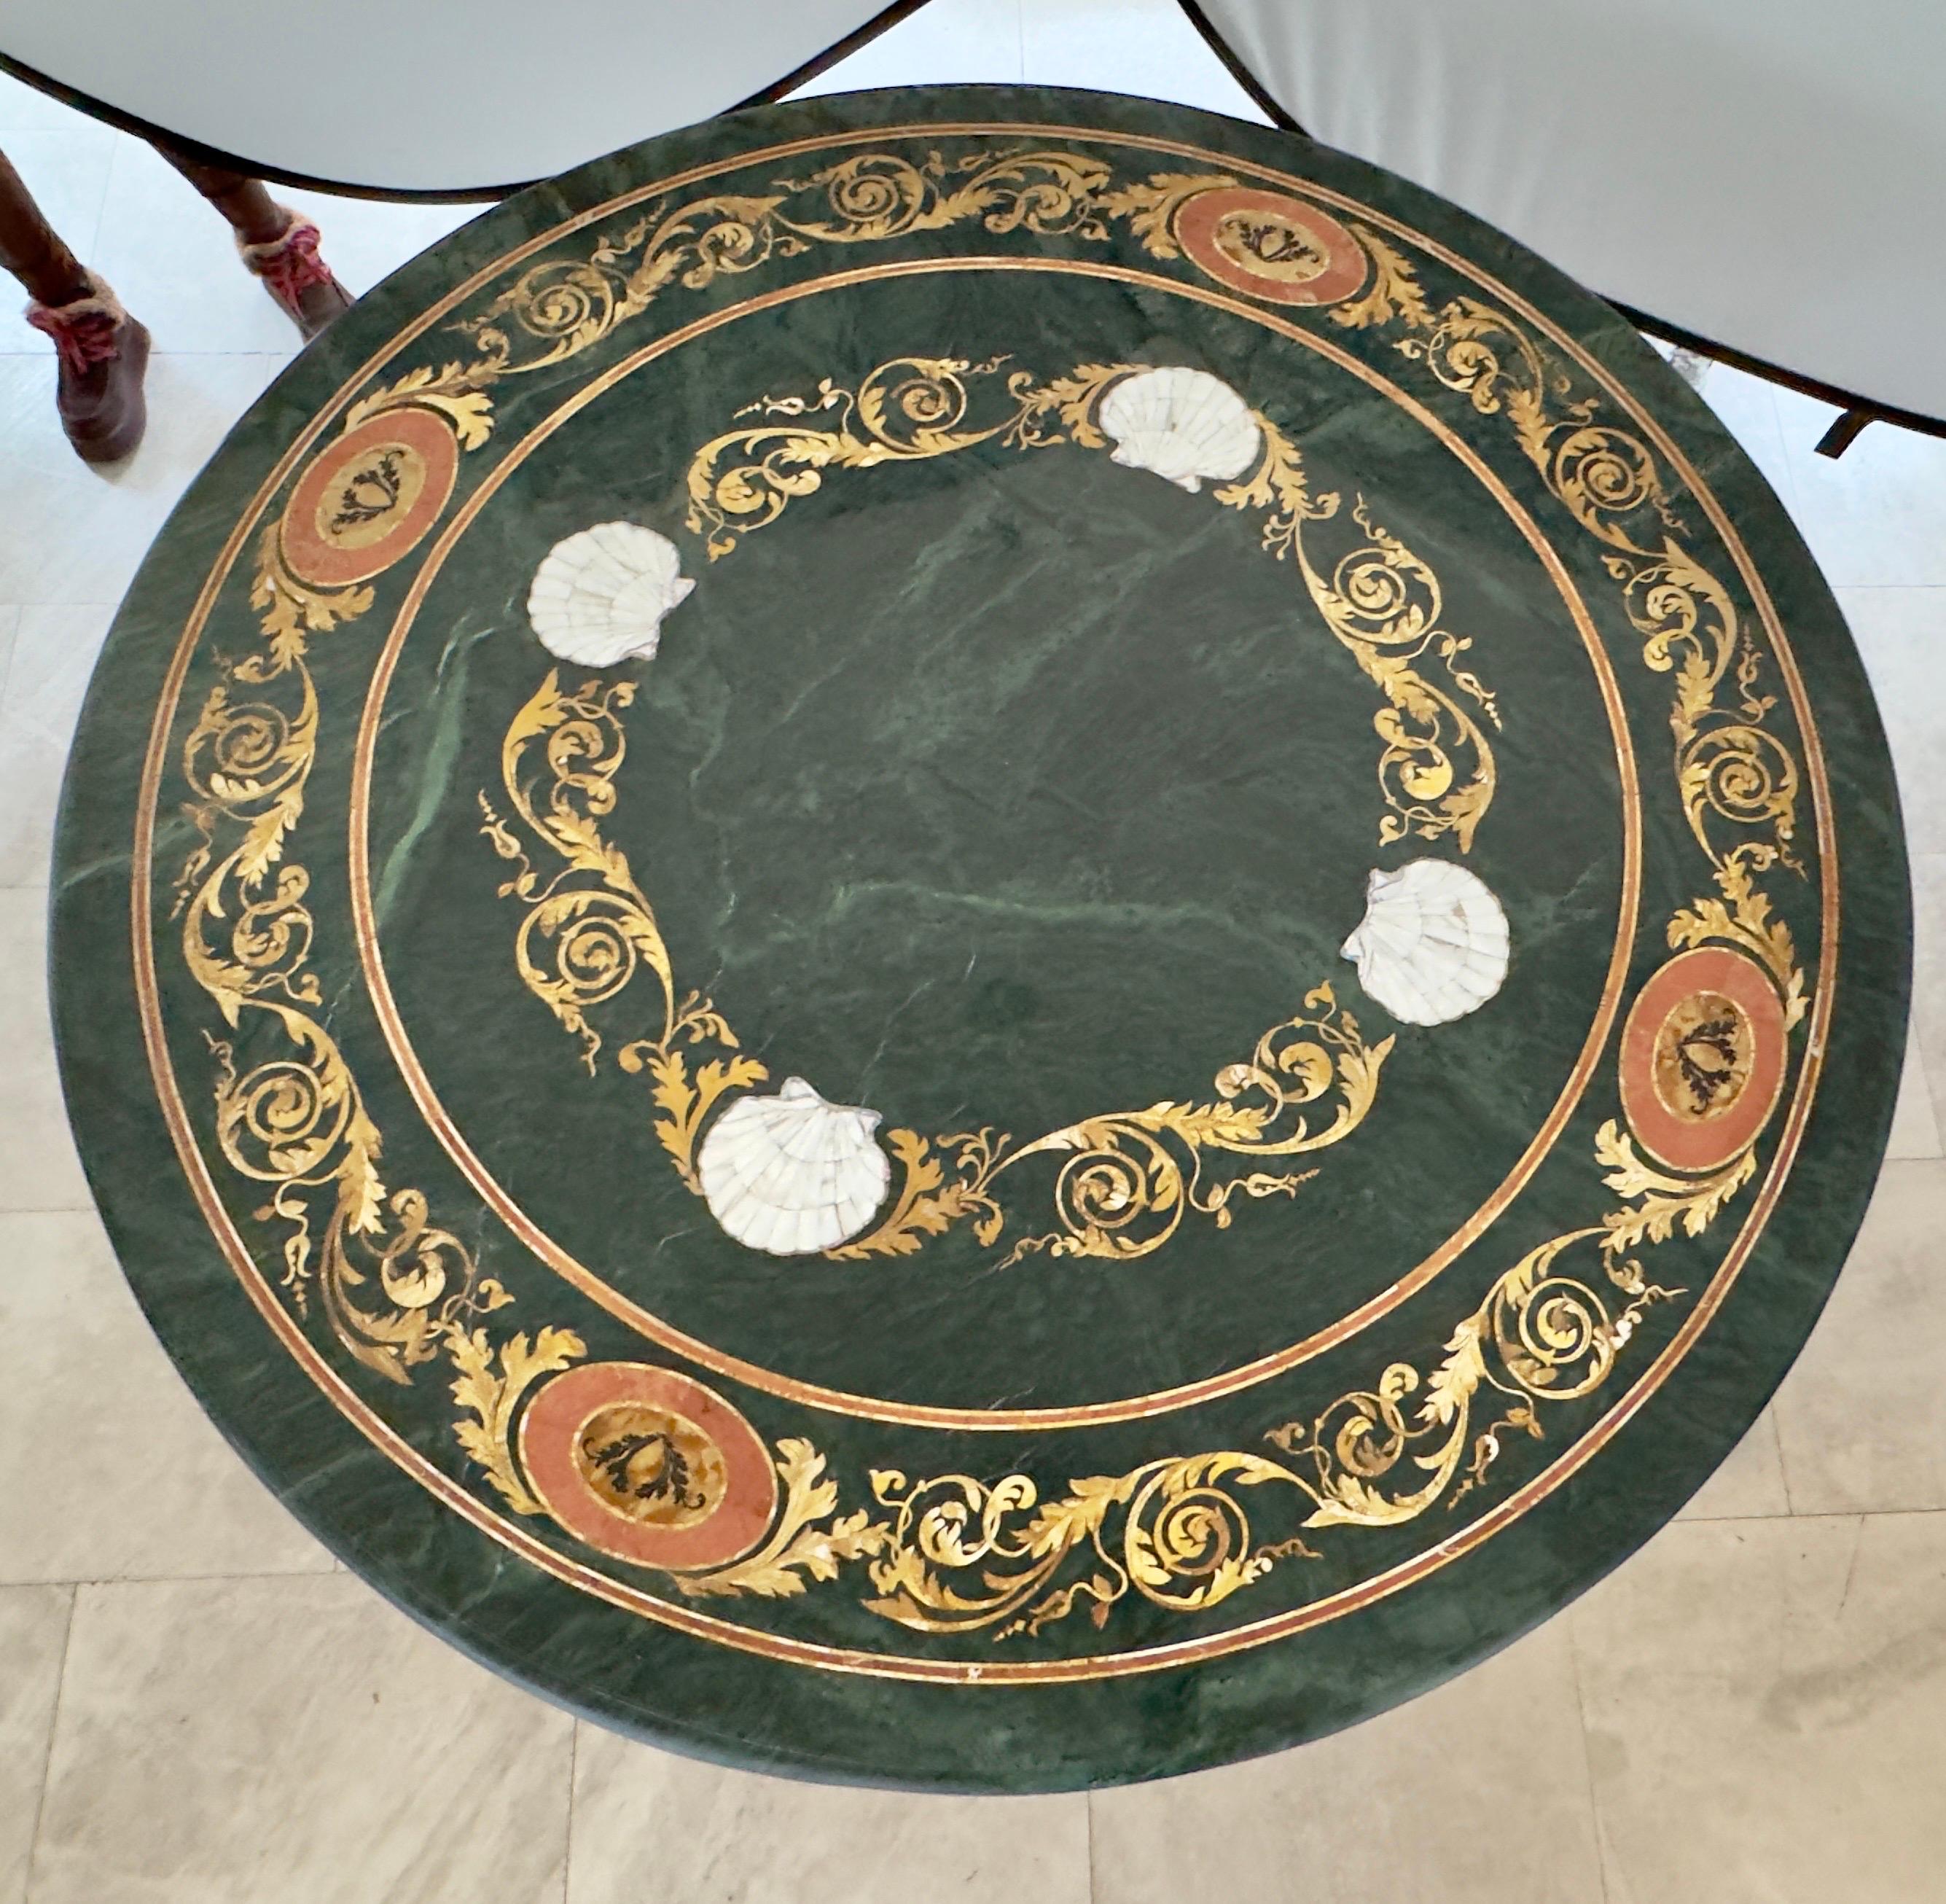 A magnificent Pietra Dura Pedestal Center Table, resplendent in lush Green Marble. This opulent piece boasts an intricate floral mosaic of mother of pearl shell, delicately interwoven with the graceful motifs of scrolls and acanthus leaves, rendered